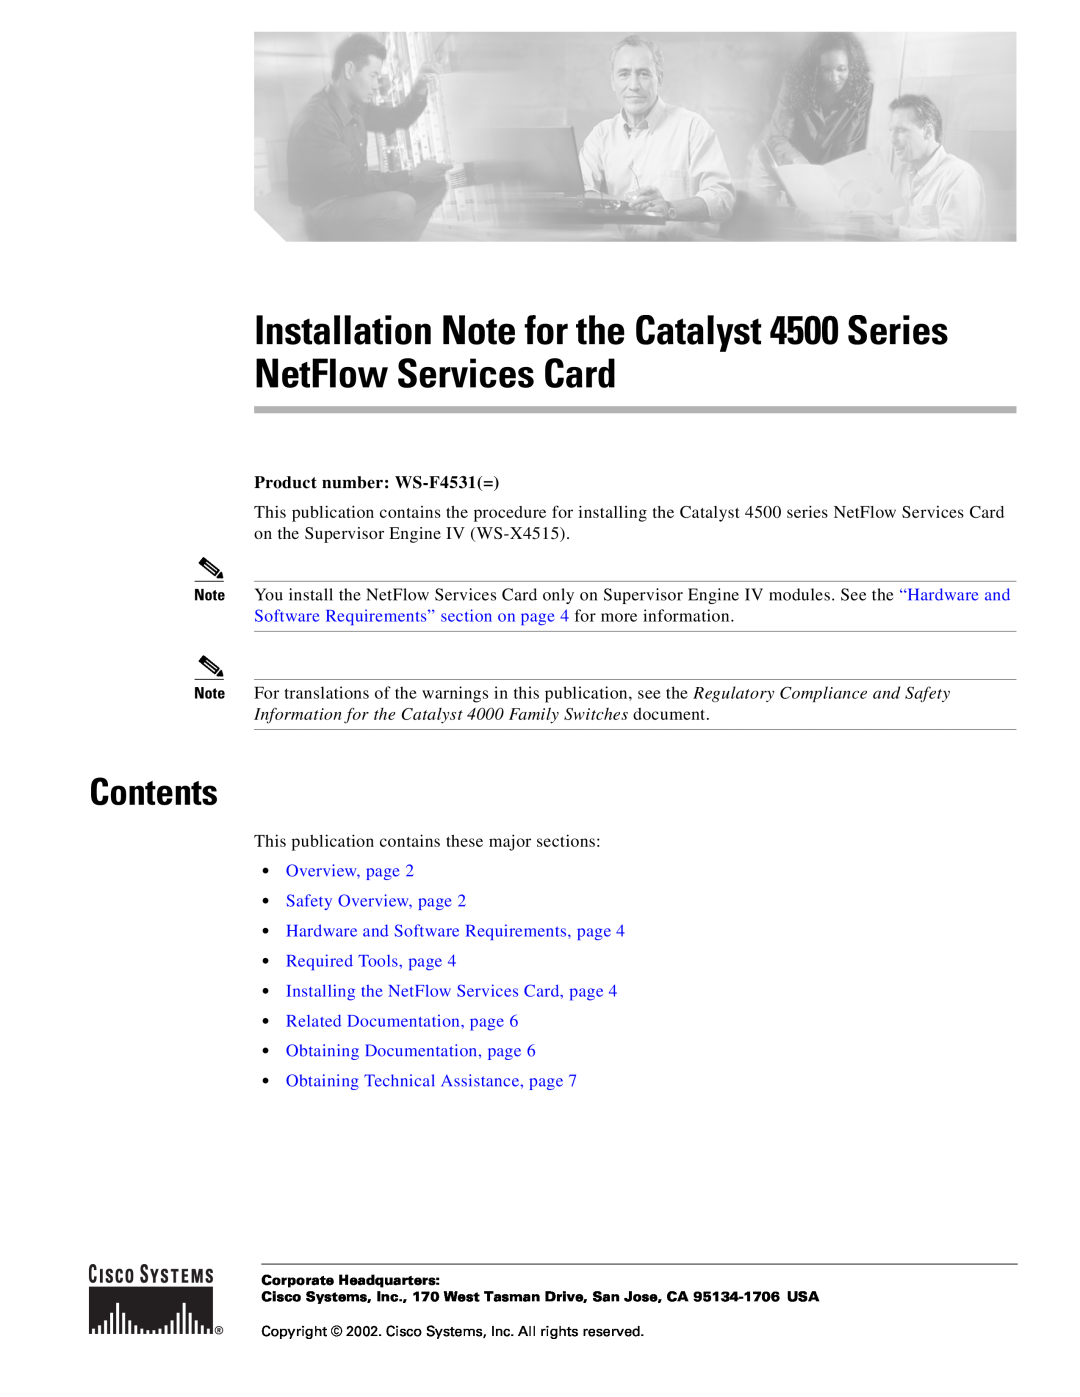 Cisco Systems WS-F4531 manual Contents, Installation Note for the Catalyst 4500 Series NetFlow Services Card 